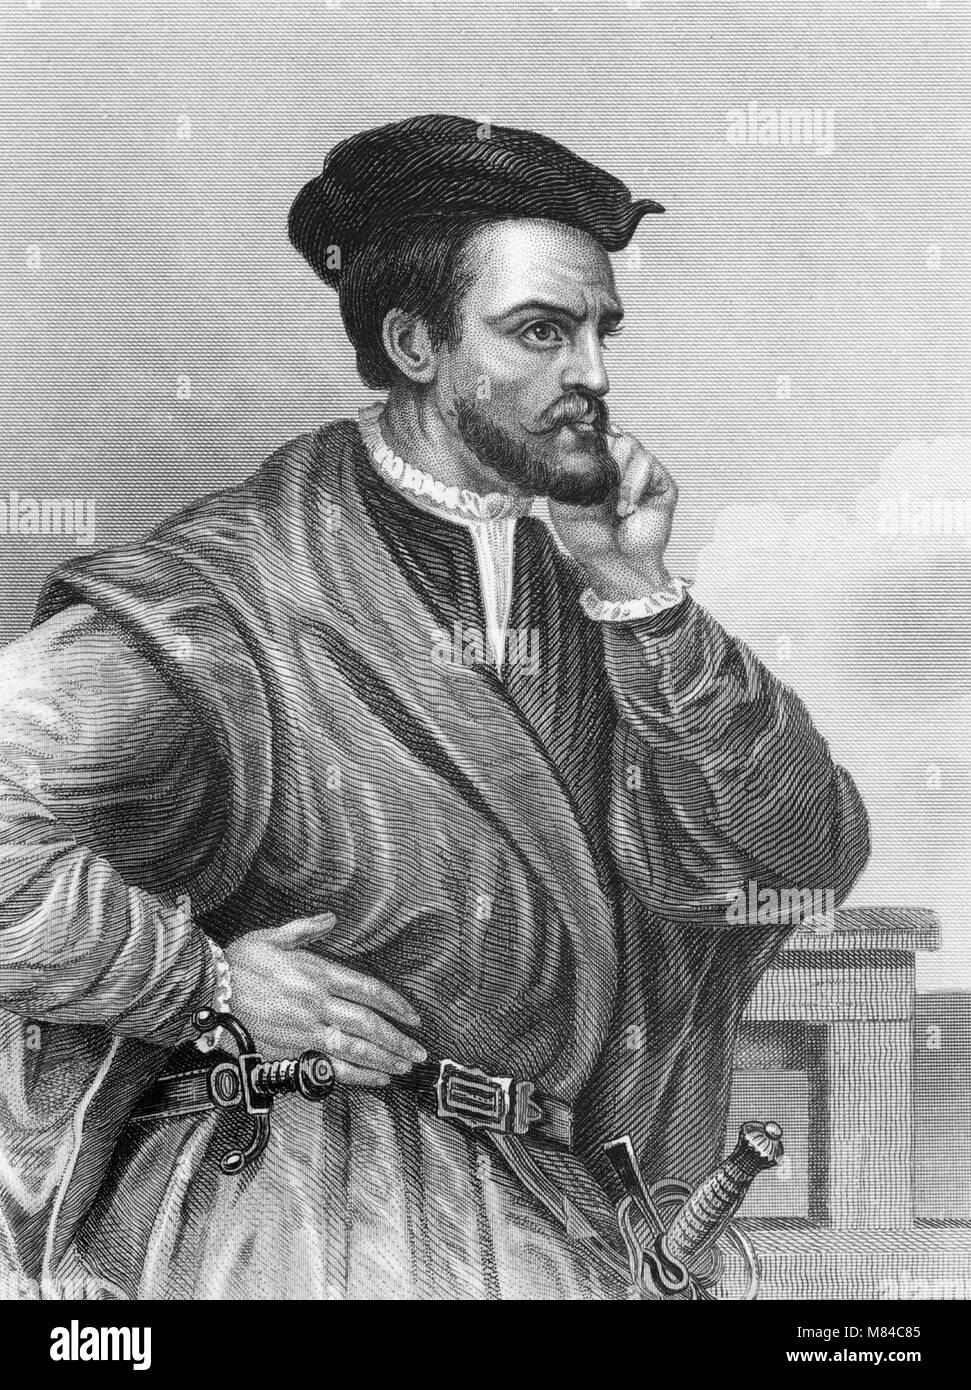 did jacques cartier discover canada